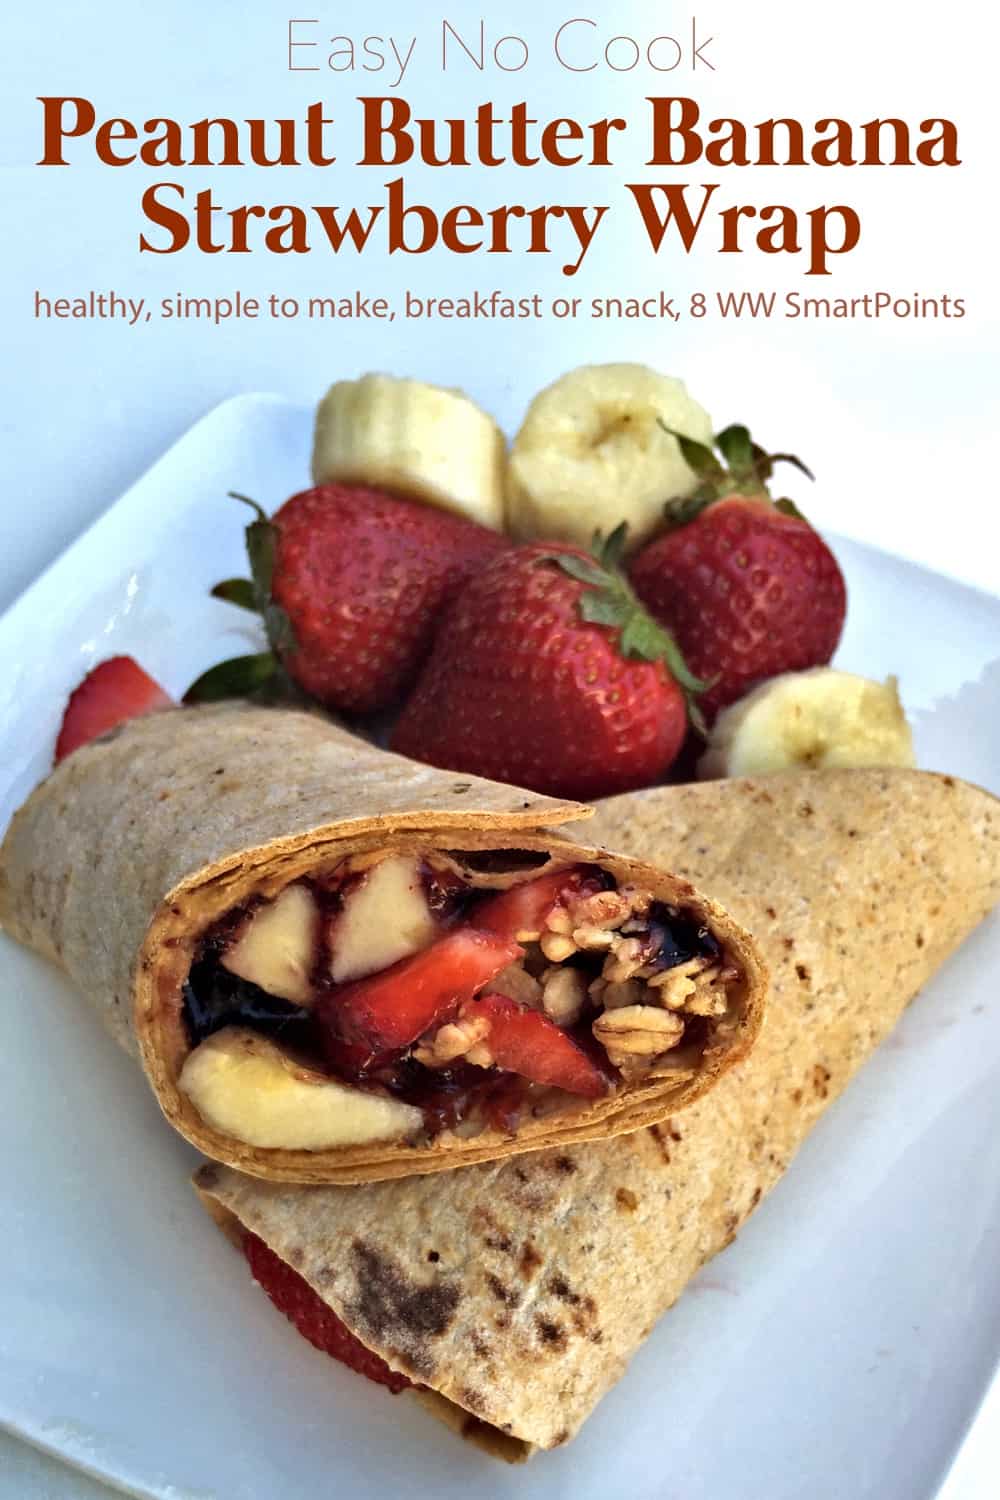 Peanut Butter Banana Strawberry Wrap cut in half on plate with fresh strawberries and banana slices.